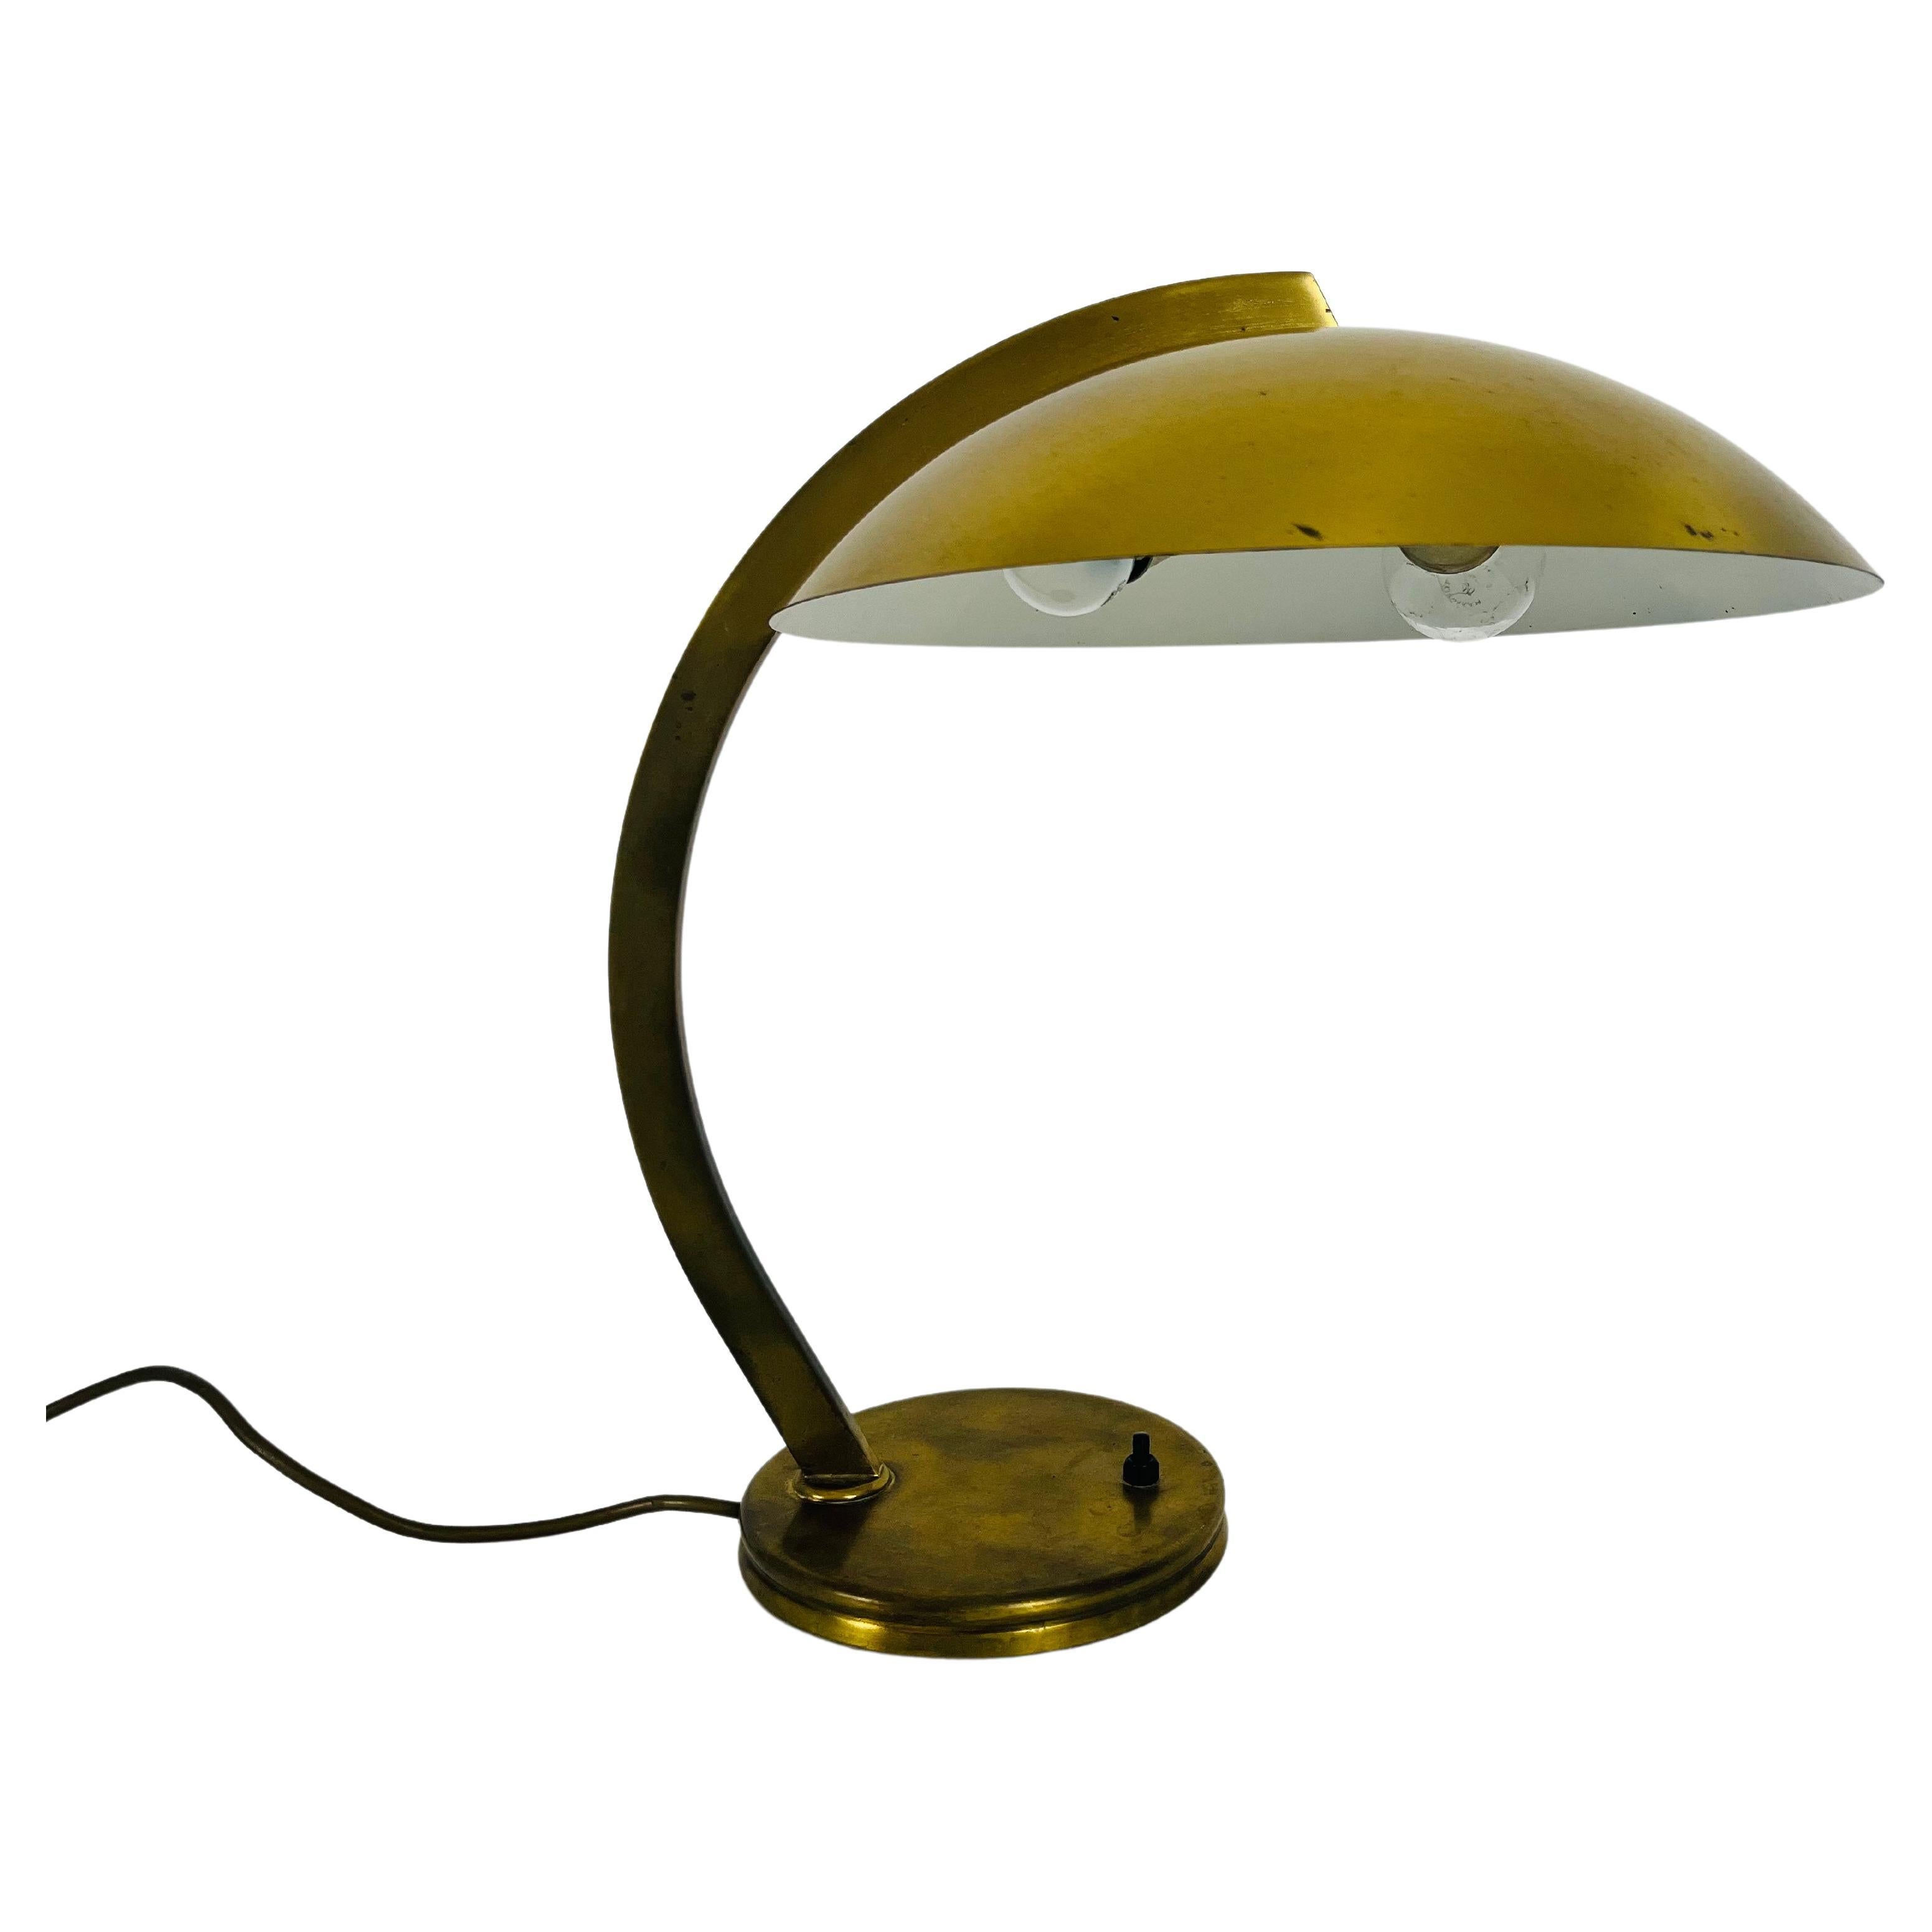 Hillebrand Midcentury Full Brass Table Lamp, 1960s, Germany For Sale